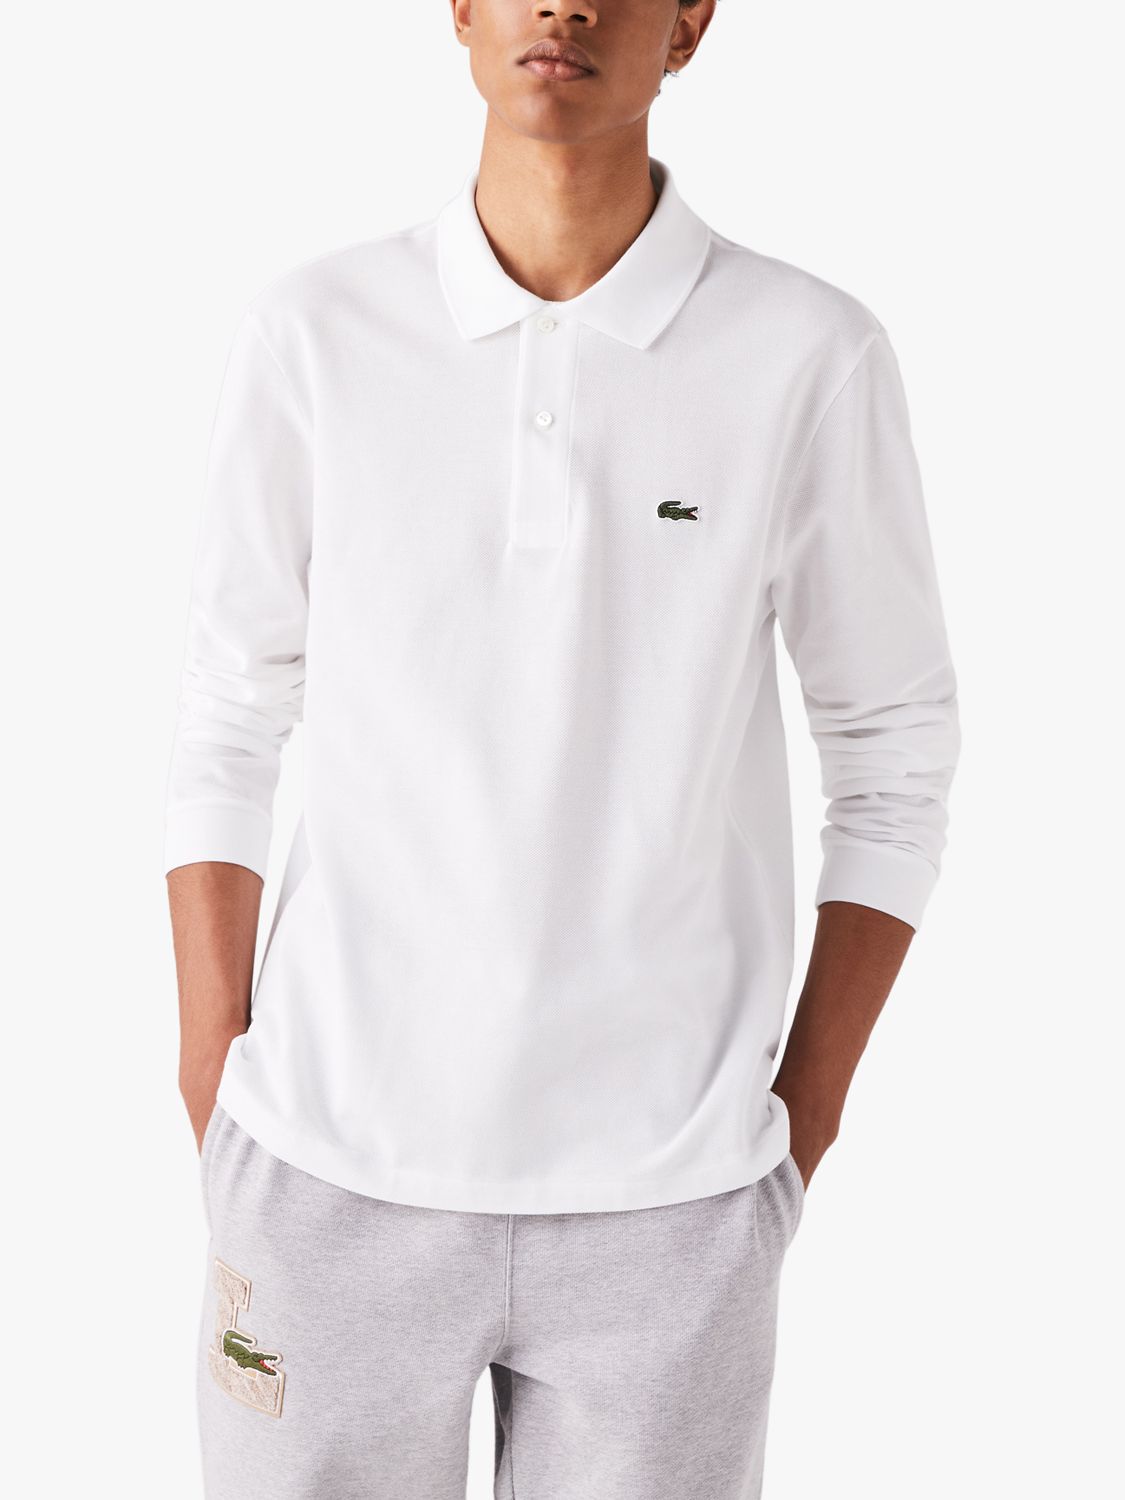 Lacoste L.13.12 Classic Regular Fit Long Sleeve Polo Shirt, 001 White at John Lewis